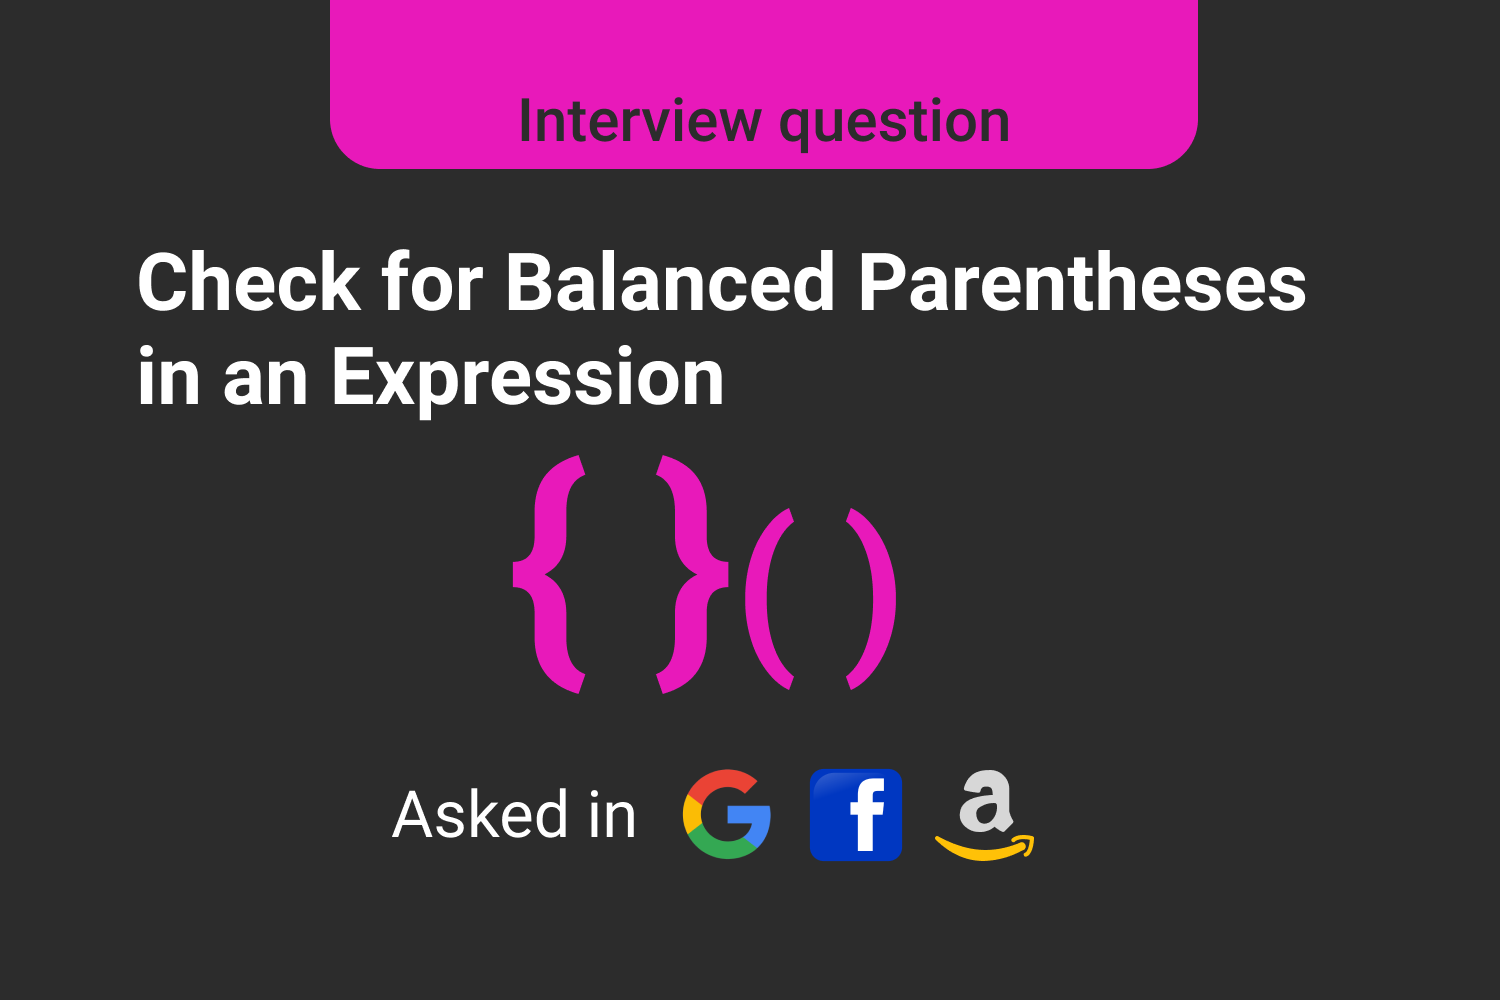 Check for Balanced Parentheses in an Expression